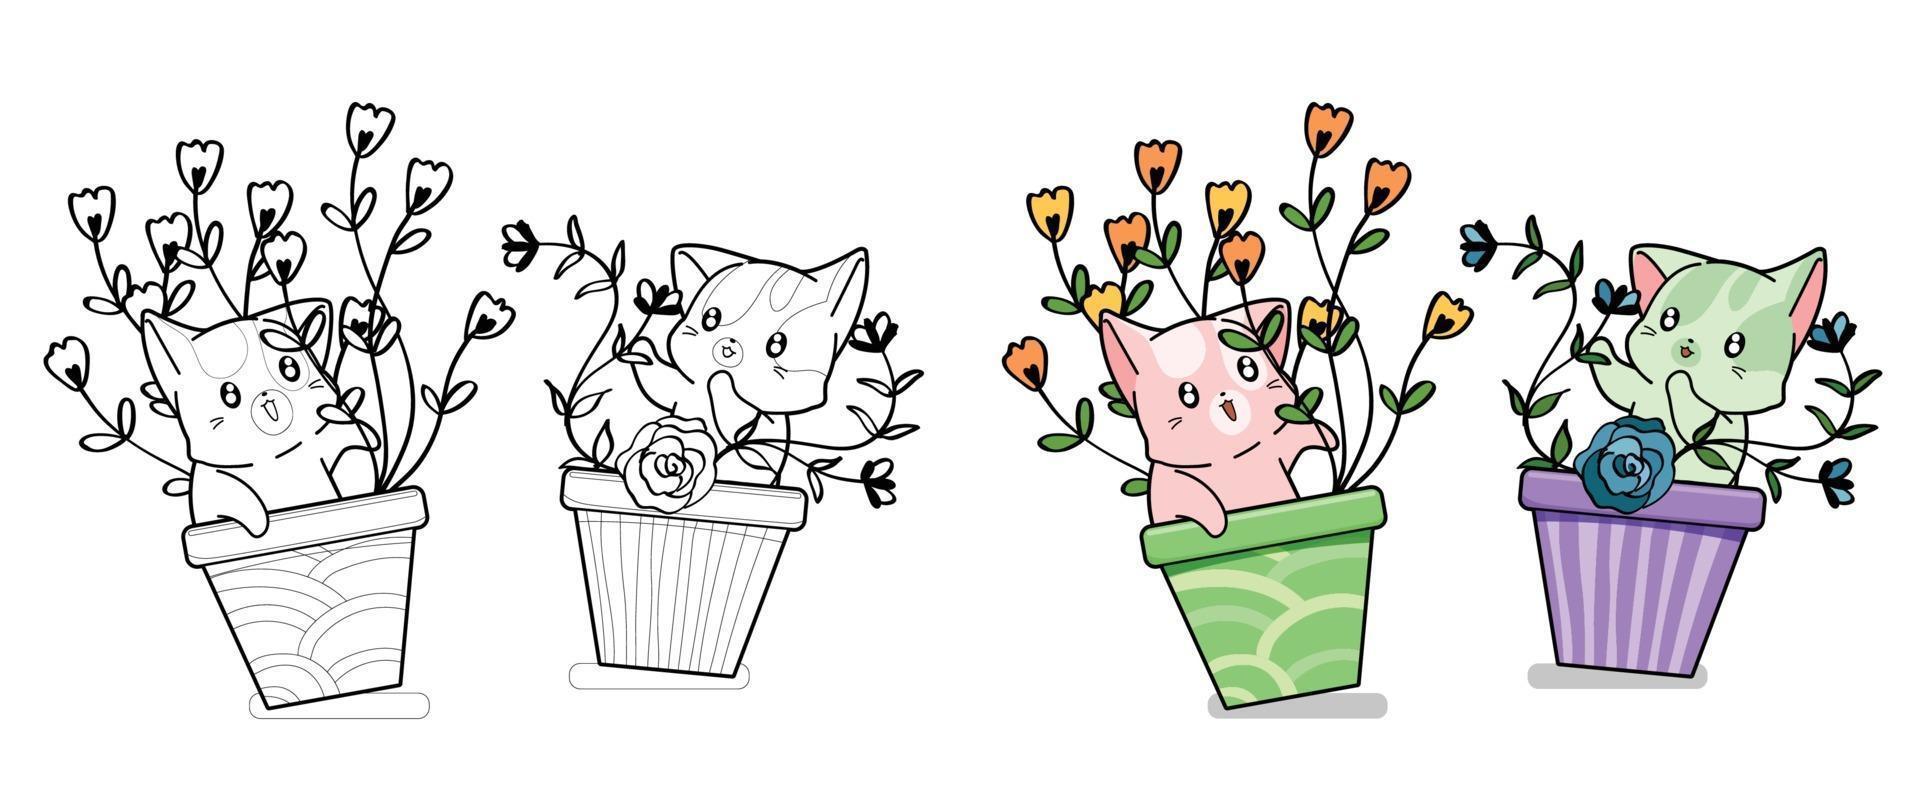 Cute cats with flowers cartoon coloring page for kids vector